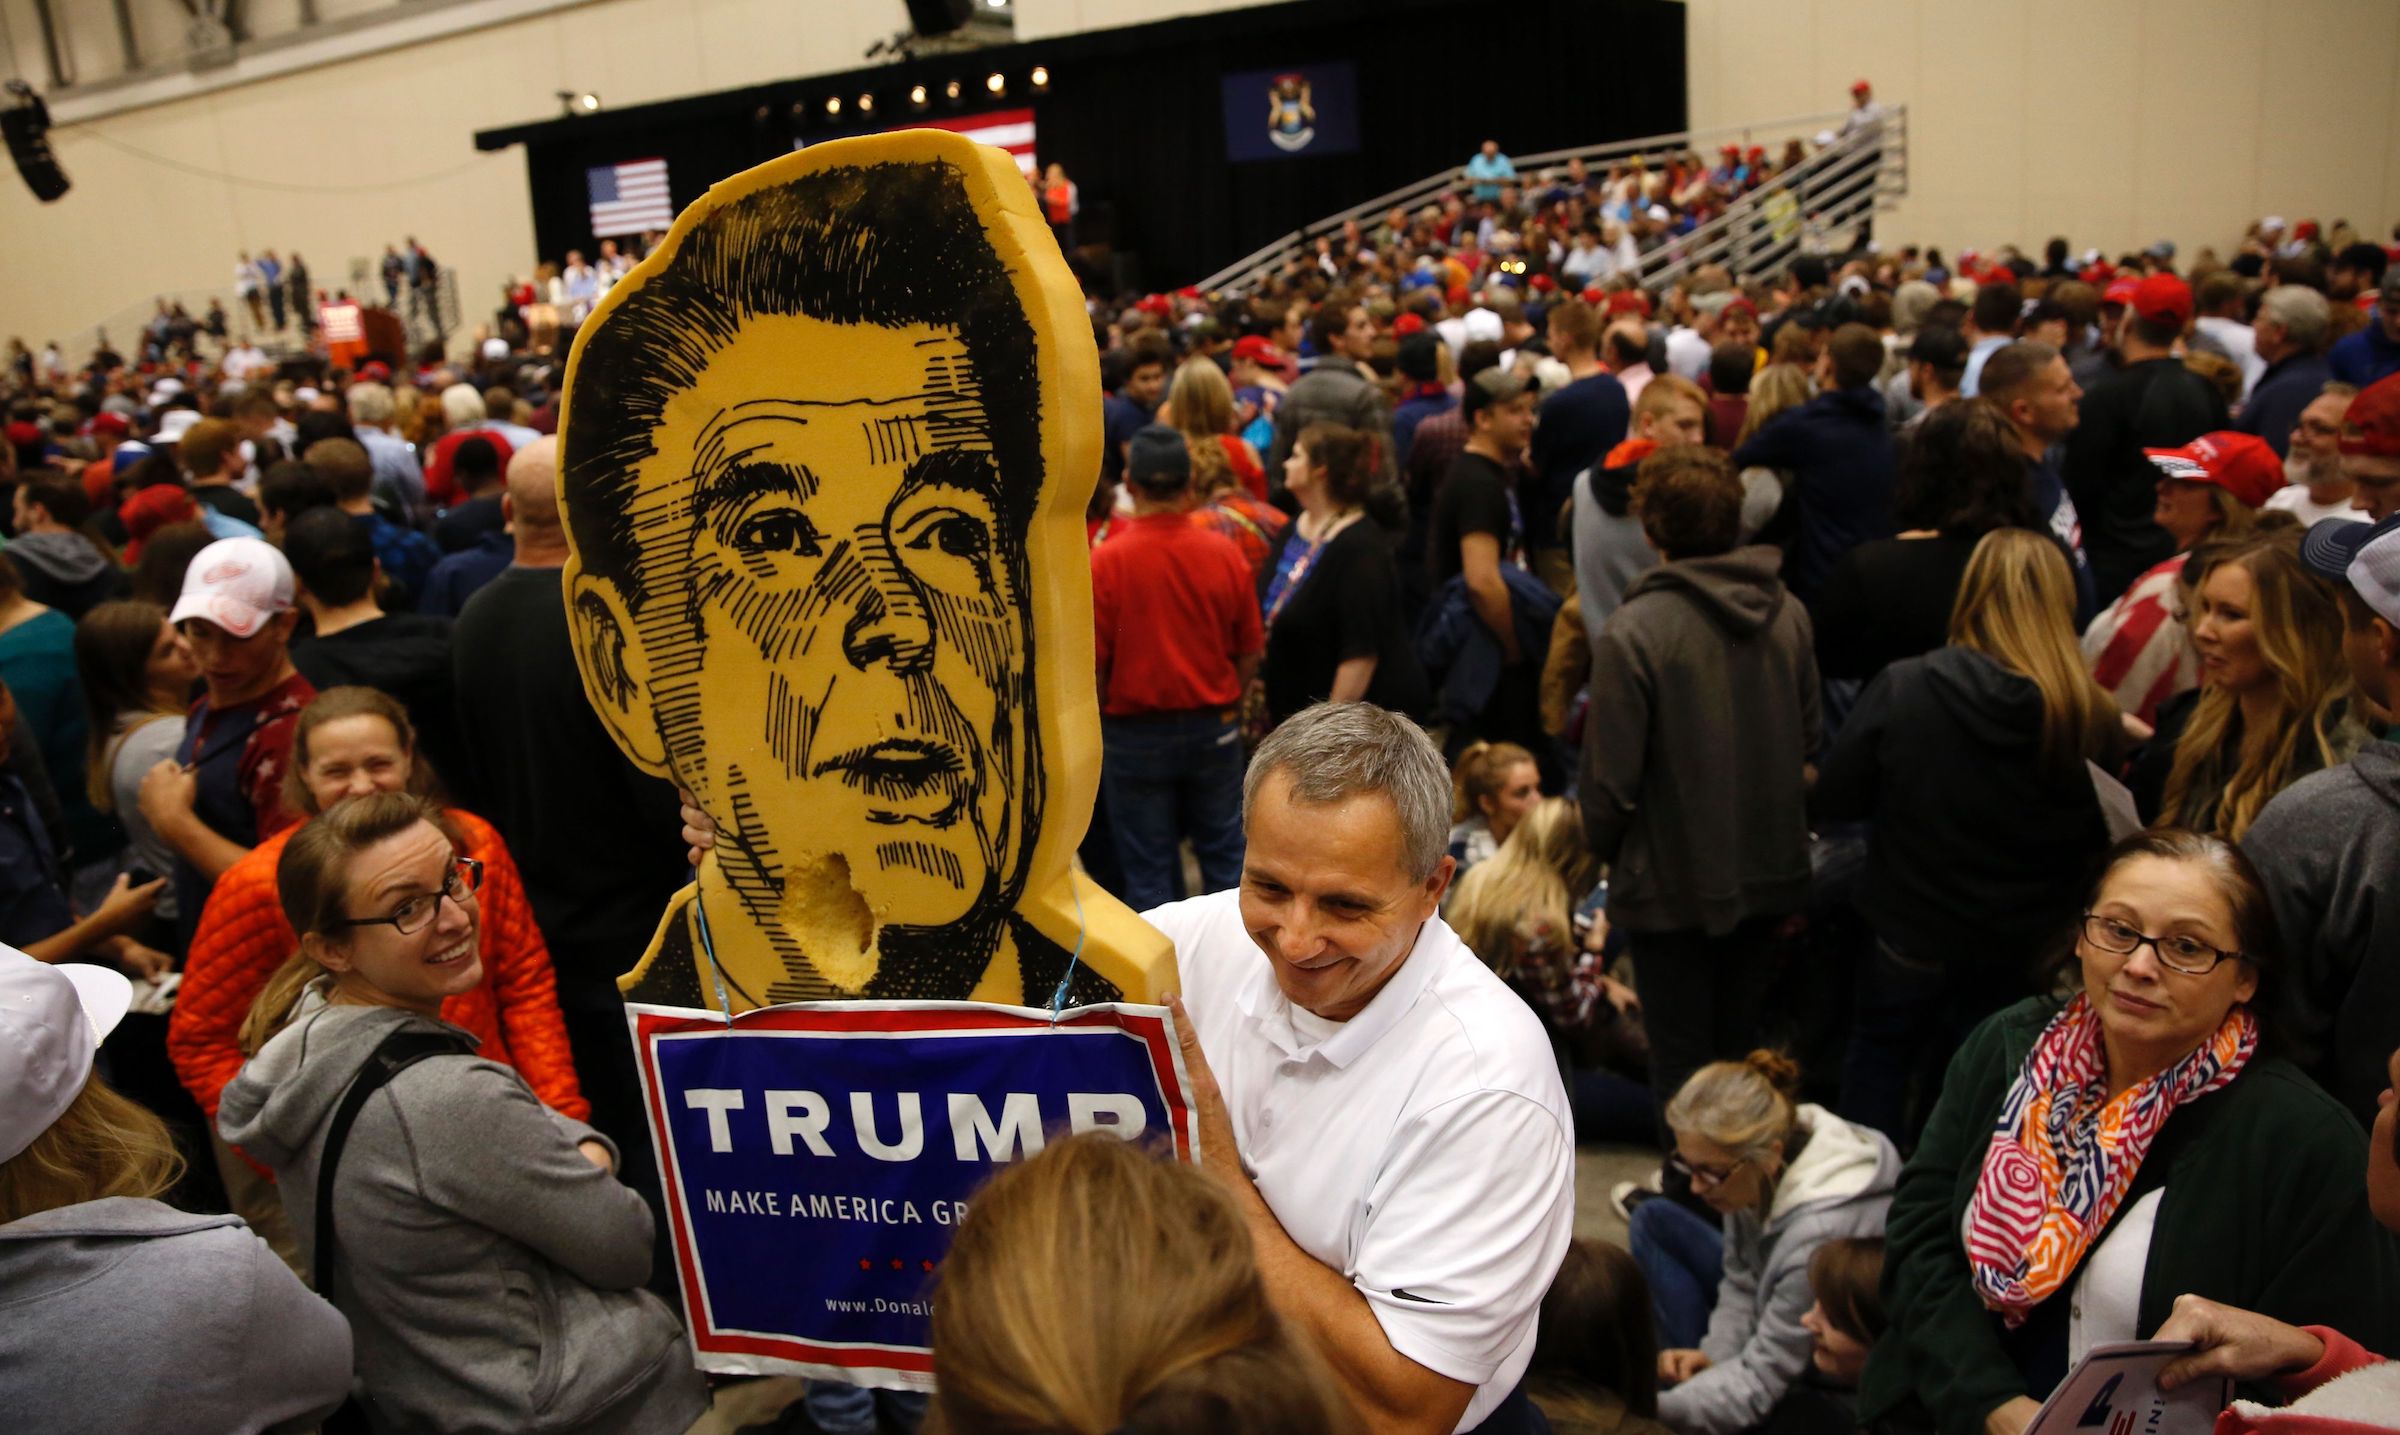 Ted Wright holds a foam campaign prop from 1980 of former U.S. President Ronald Reagan prior to the final campaign event of U.S. Republican Presidential candidate Donald Trump at Devos Place on November 7, 2016 in Grand Rapids, Michigan. (Jeff Kowalsky&mdash;AFP/Getty Images)